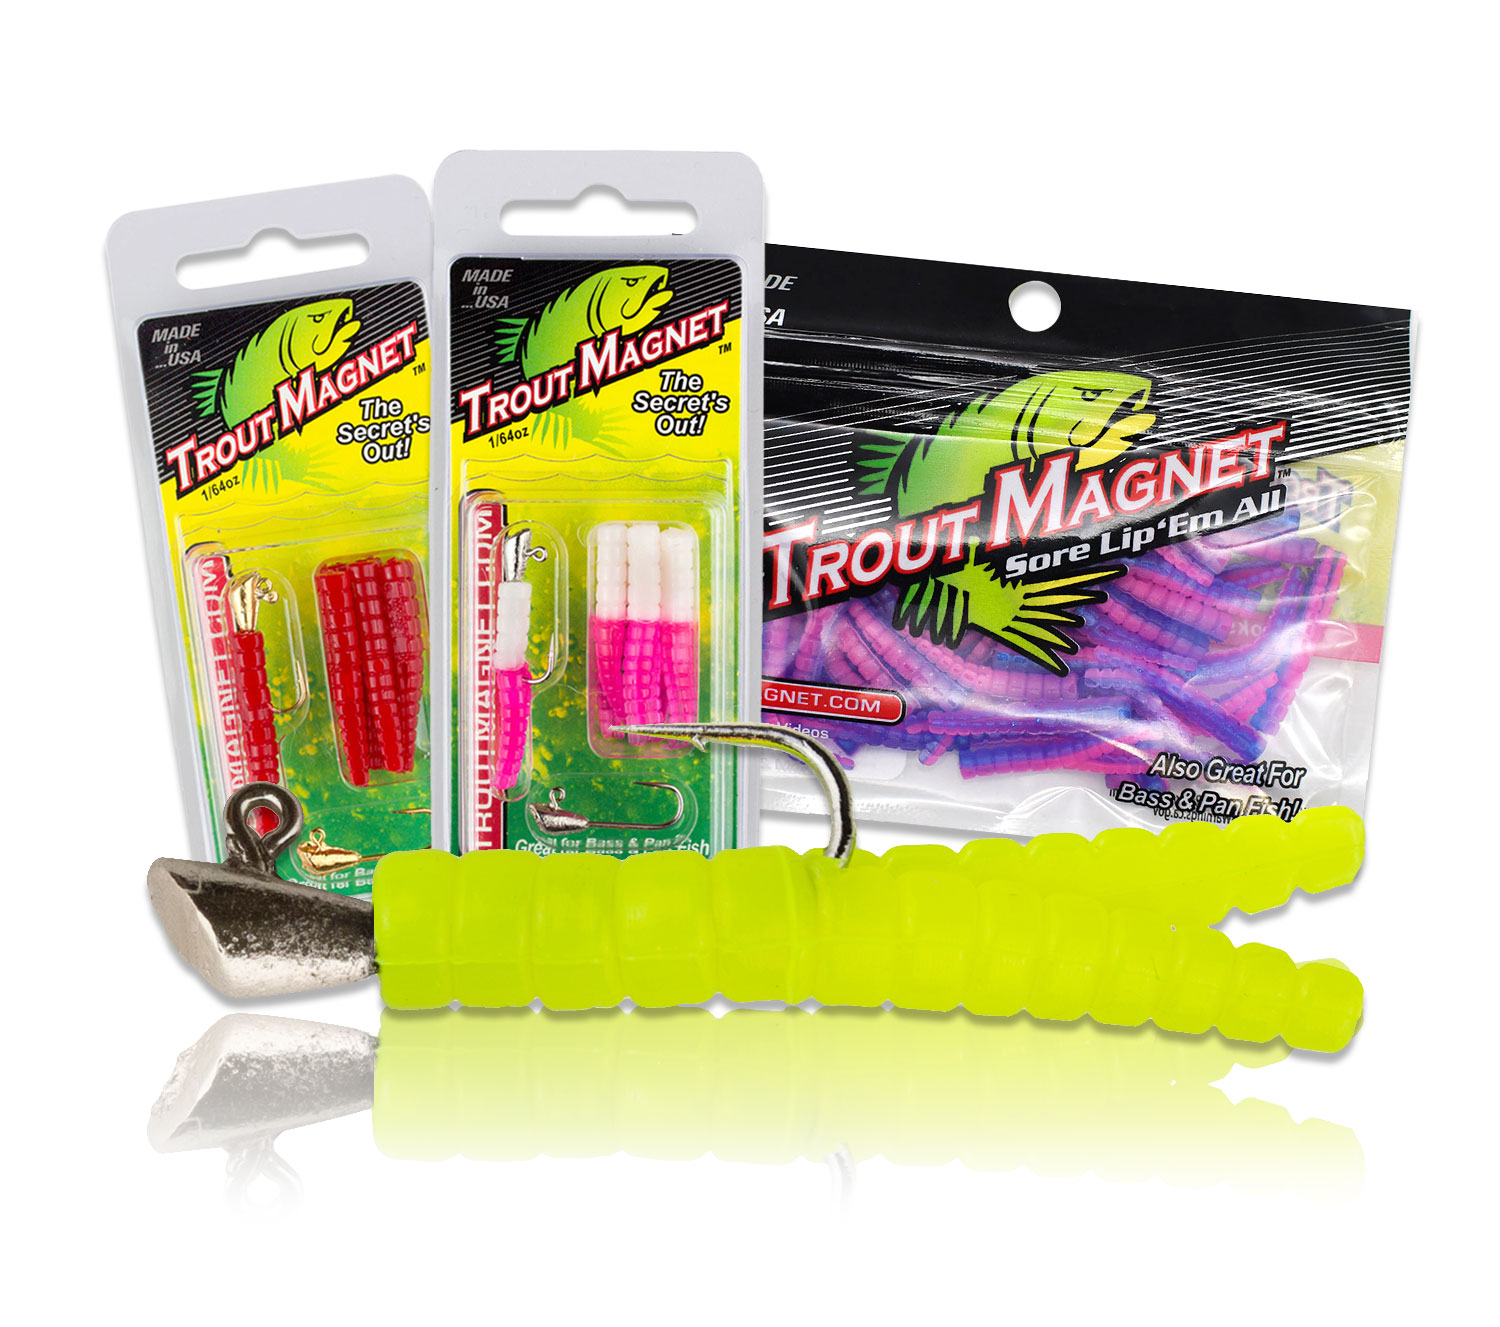 Search results for: 'creat and jay trout magnet kit